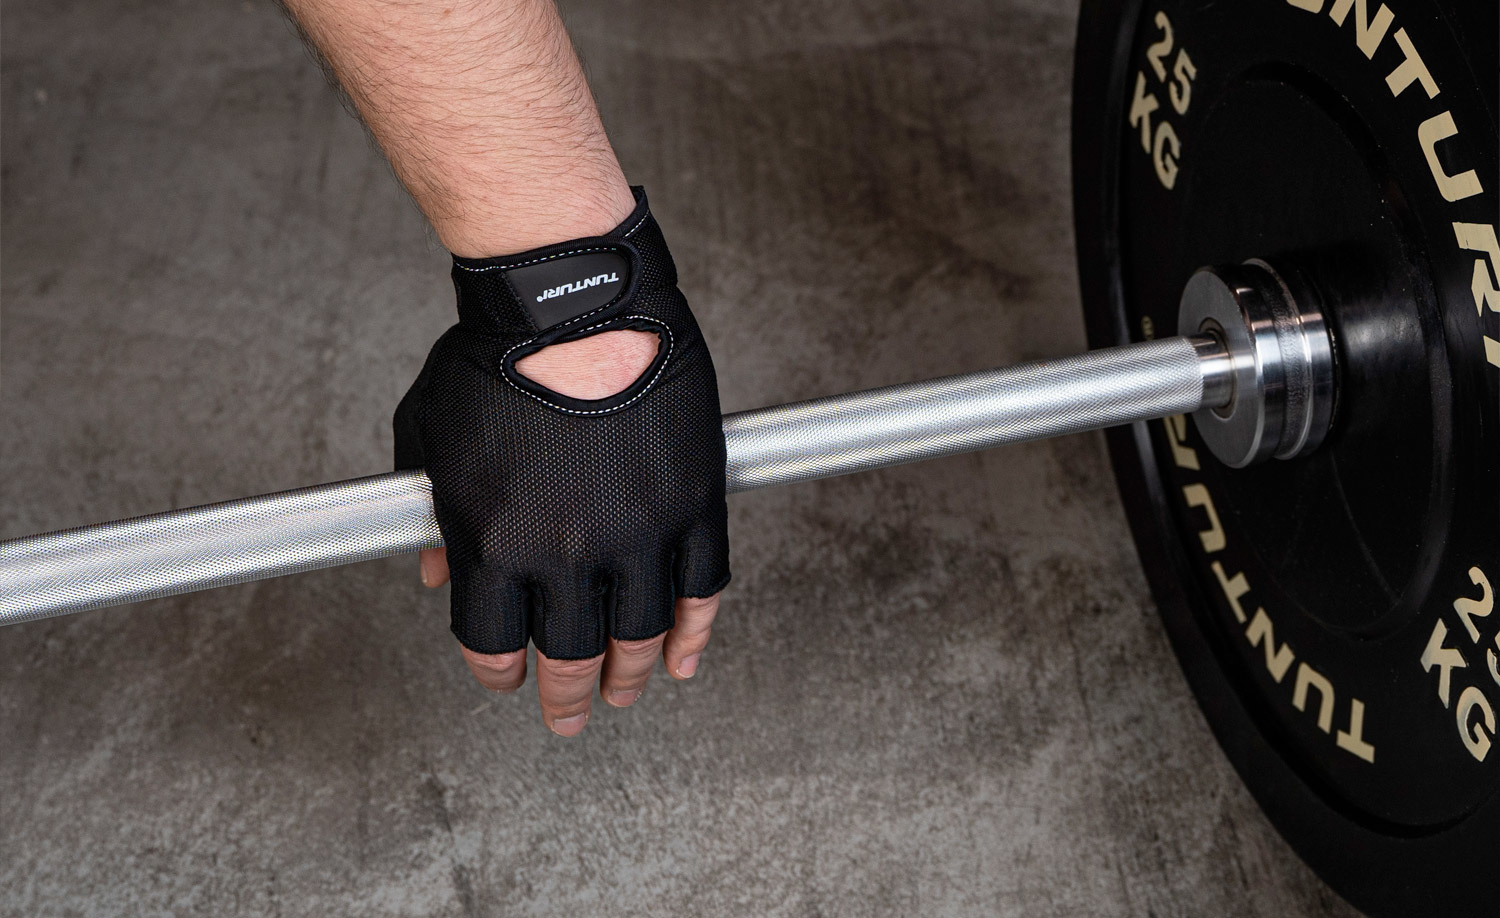 The importance of using support tools in strength training